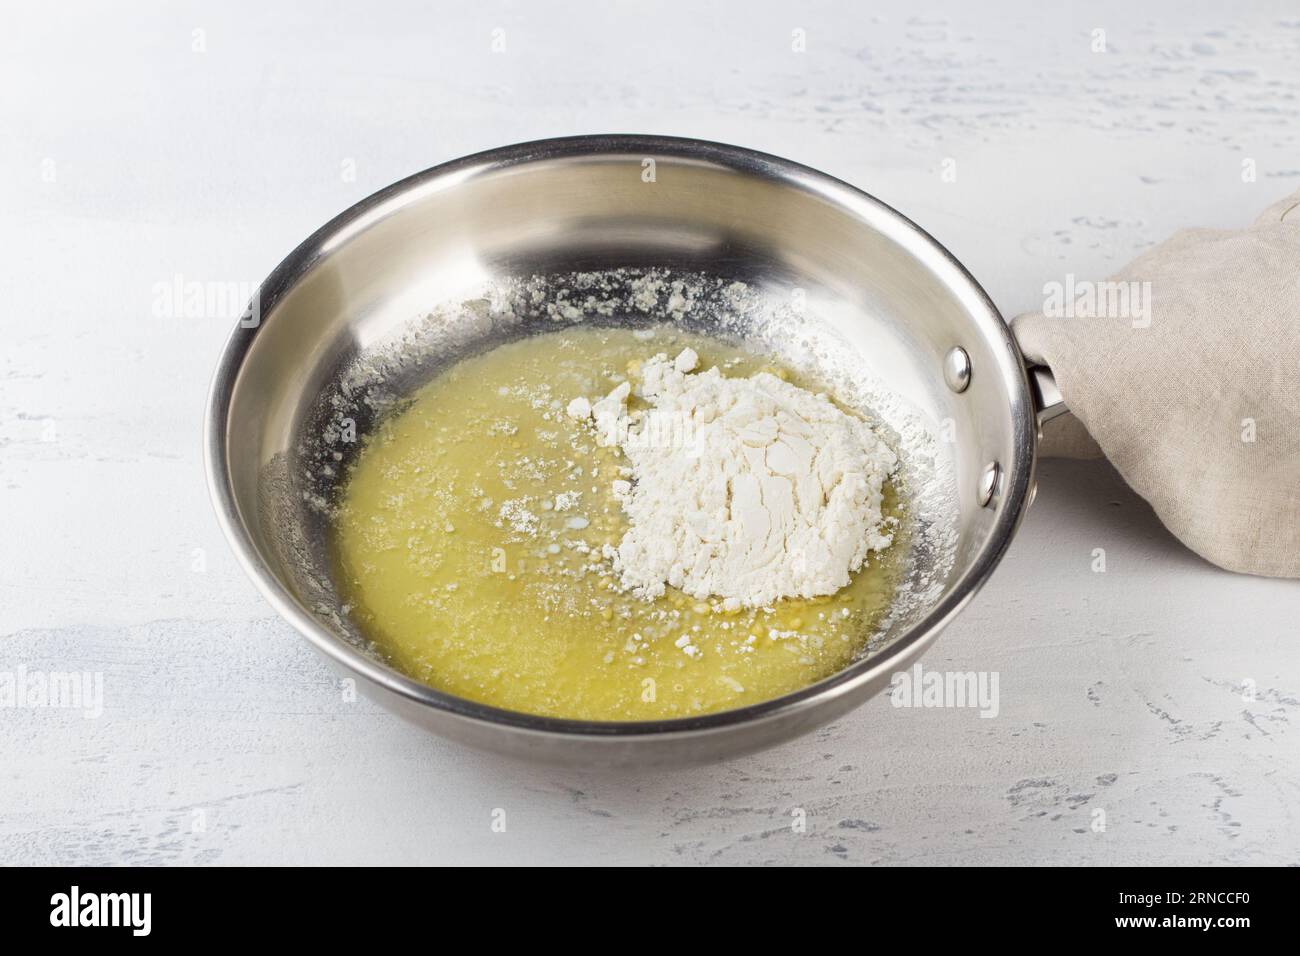 Flour is added to melted butter in a frying pan on a light gray background. Making cheese pasta sauce, step by step, do it yourself, step 2. Stock Photo